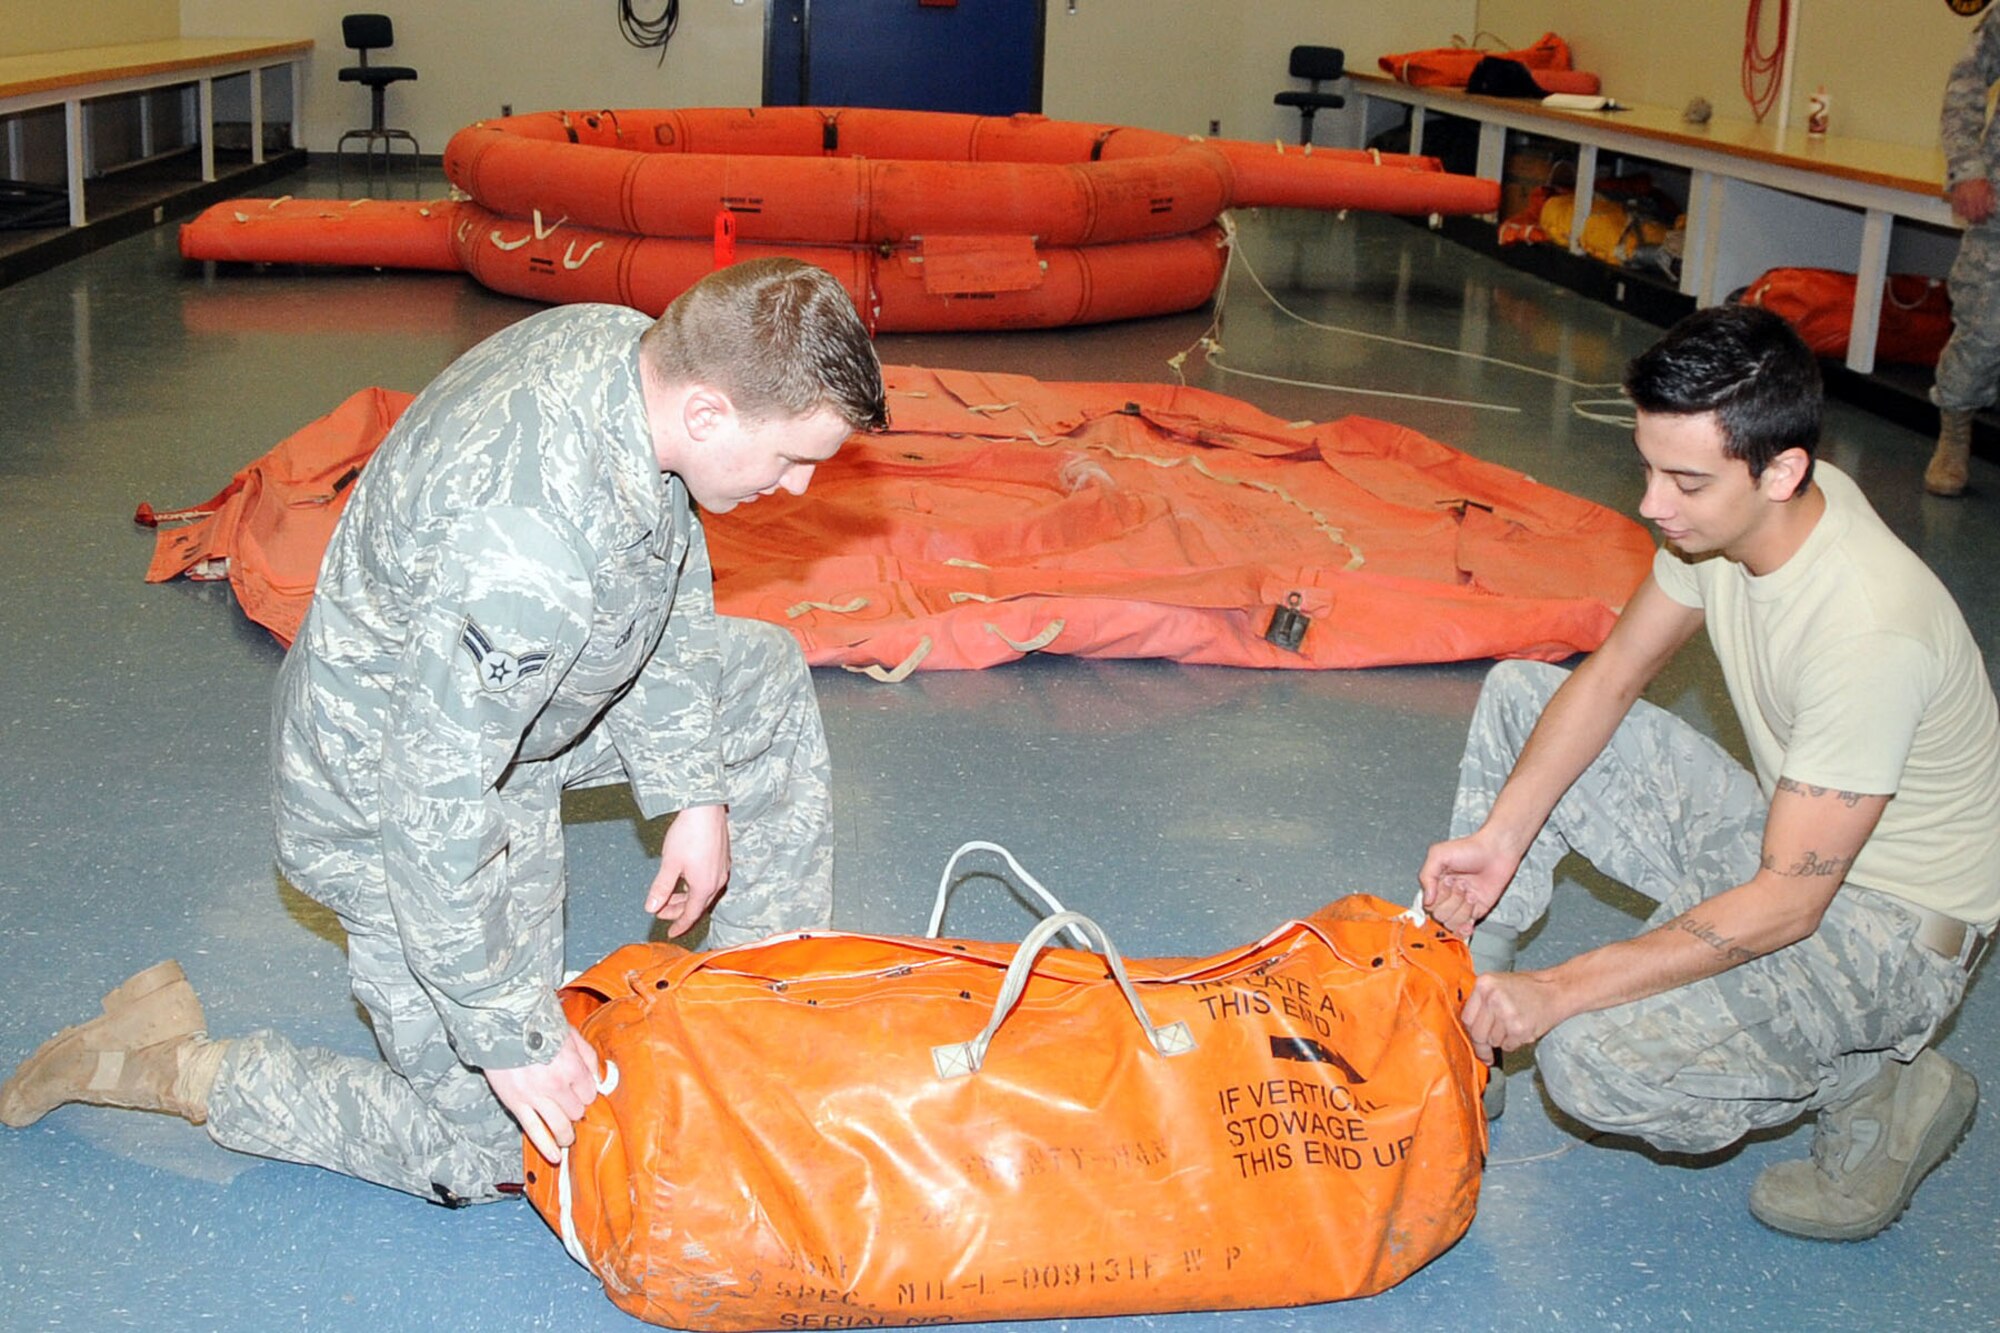 OFFUTT AIR FORCE BASE, Neb. -- Airman 1st Class Andrew Carey, an aircrew flight equipment technician with the 55th Operations Support Squadron and Airman 1st Class Steven Cunningham, also an aircrew flight equipment technician with the 55th OSS, demonstrate the different stages of the F2B Life Raft here April 29. The raft can support 20 people and is also reversible. U.S. Air Force Photo by Kendra Williams